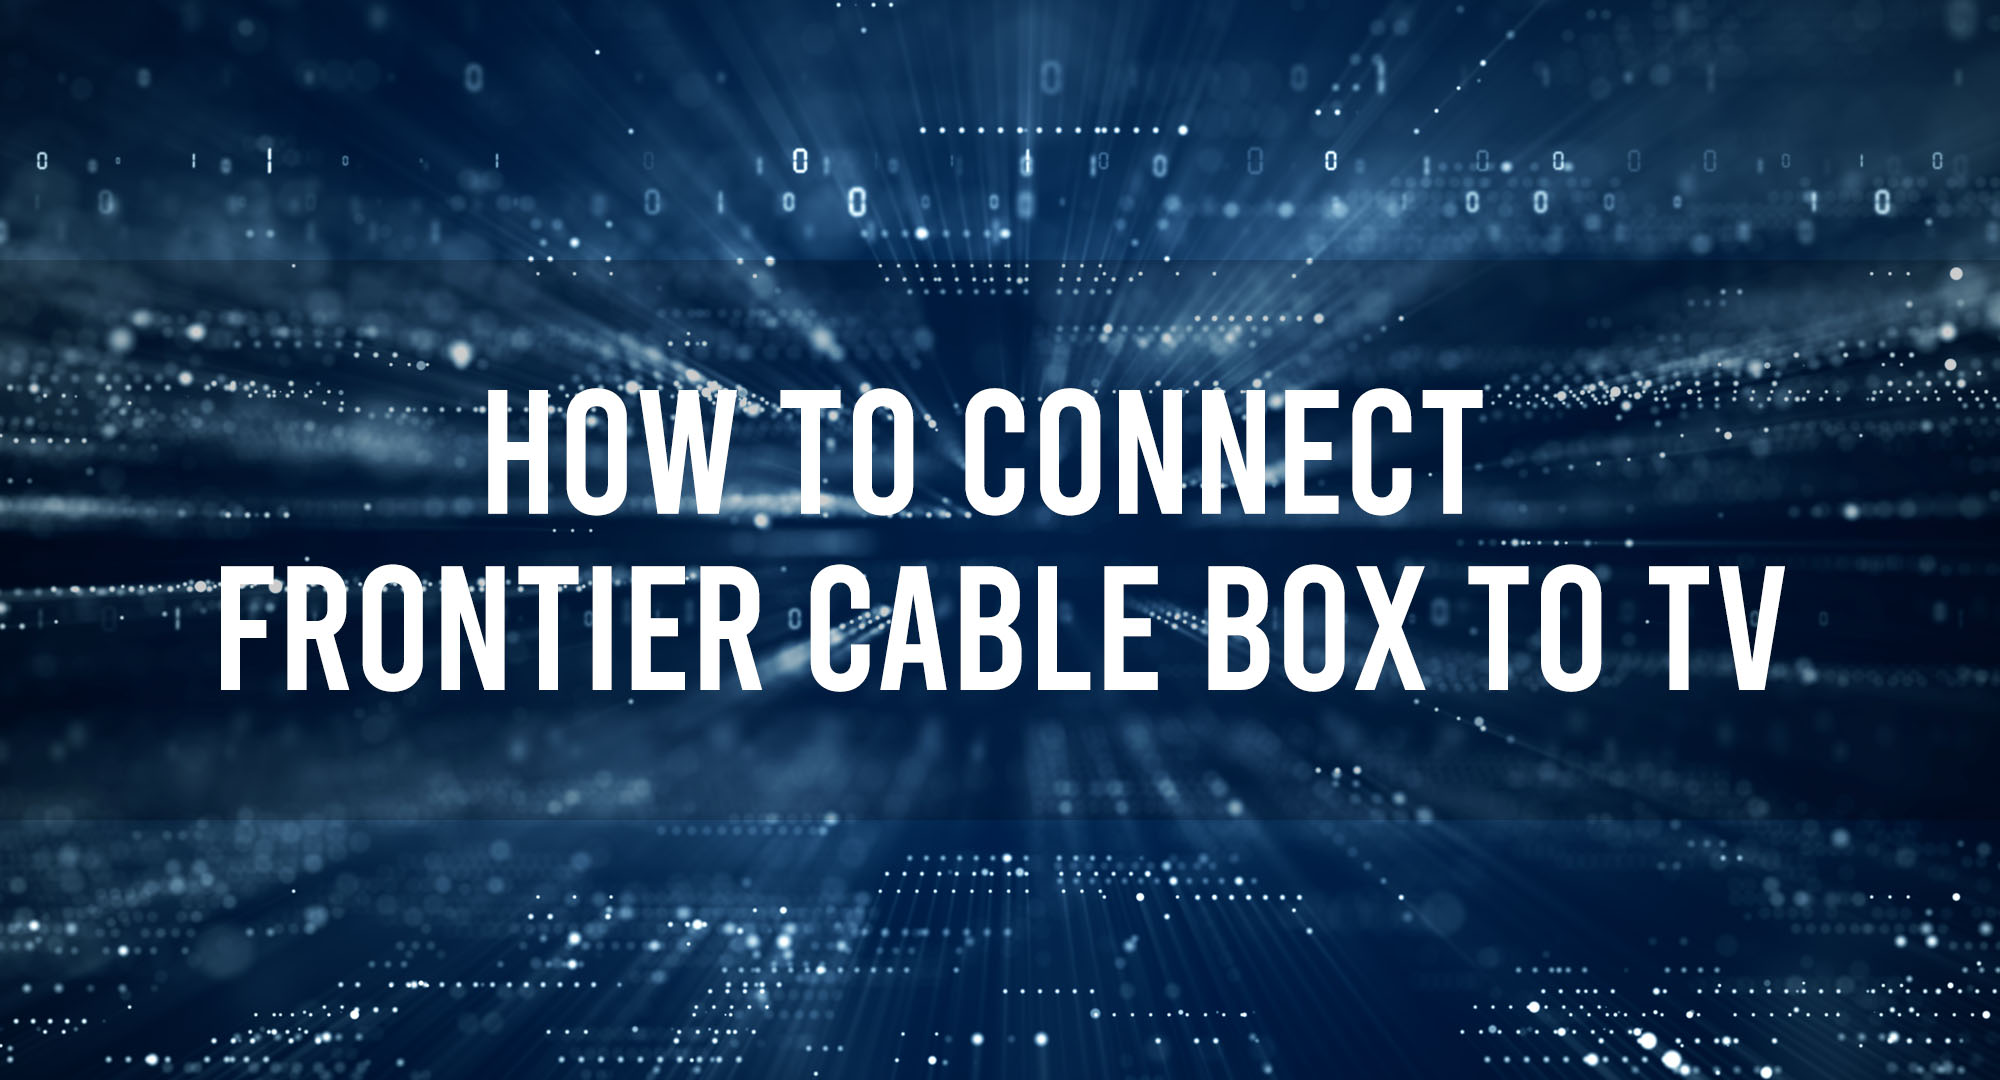 How to connect frontier cable box to tv